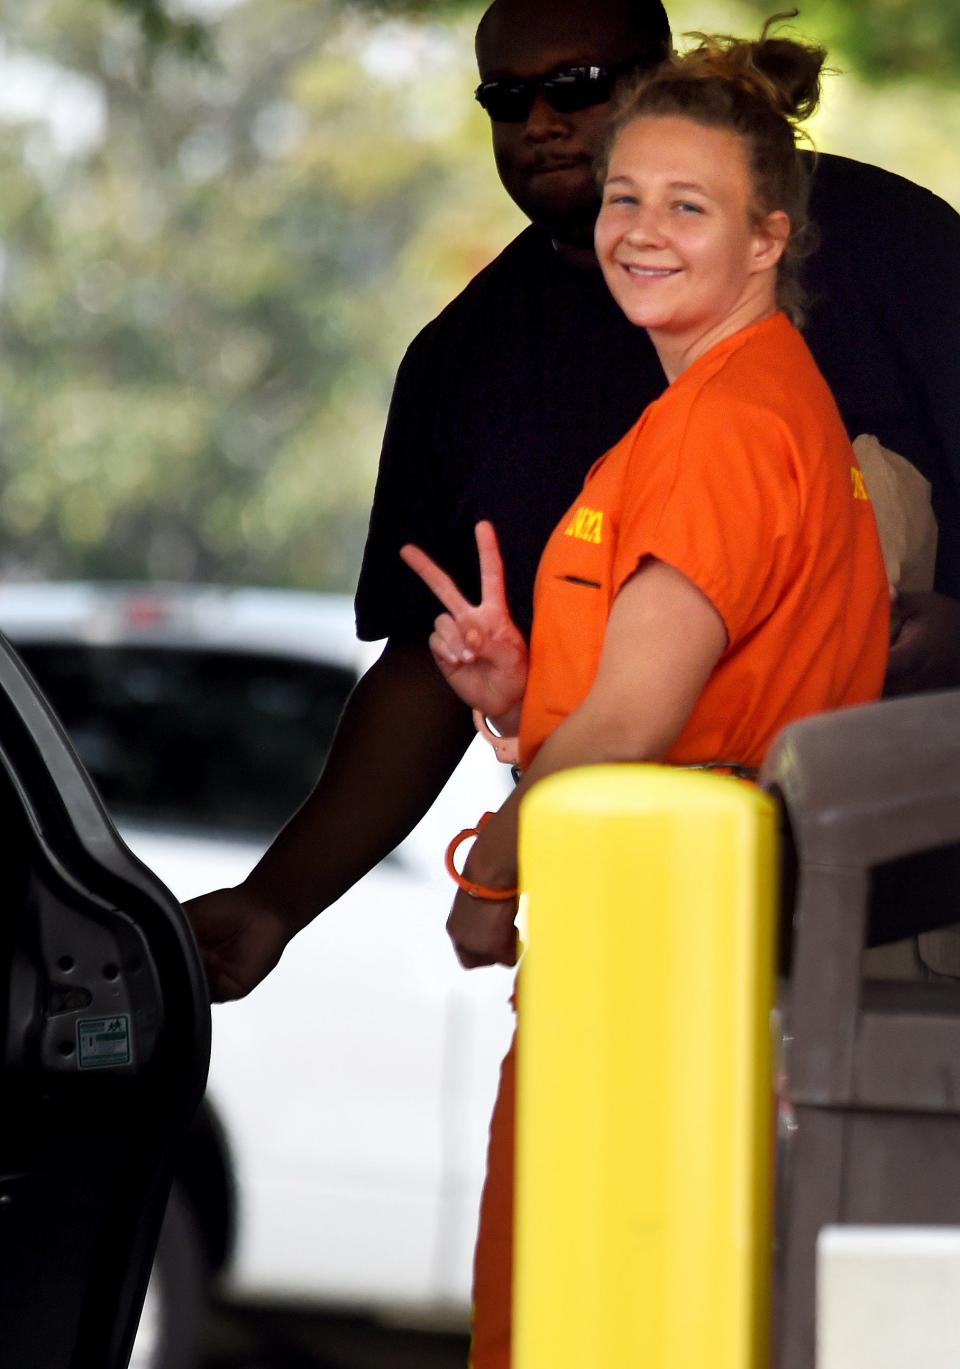 Reality Winner, who pleaded guilty to sending a classified US report to a news agency, walks out of a courthouse in Augusta, Georgia, in 2018 after being sentenced to more than five years in prison.